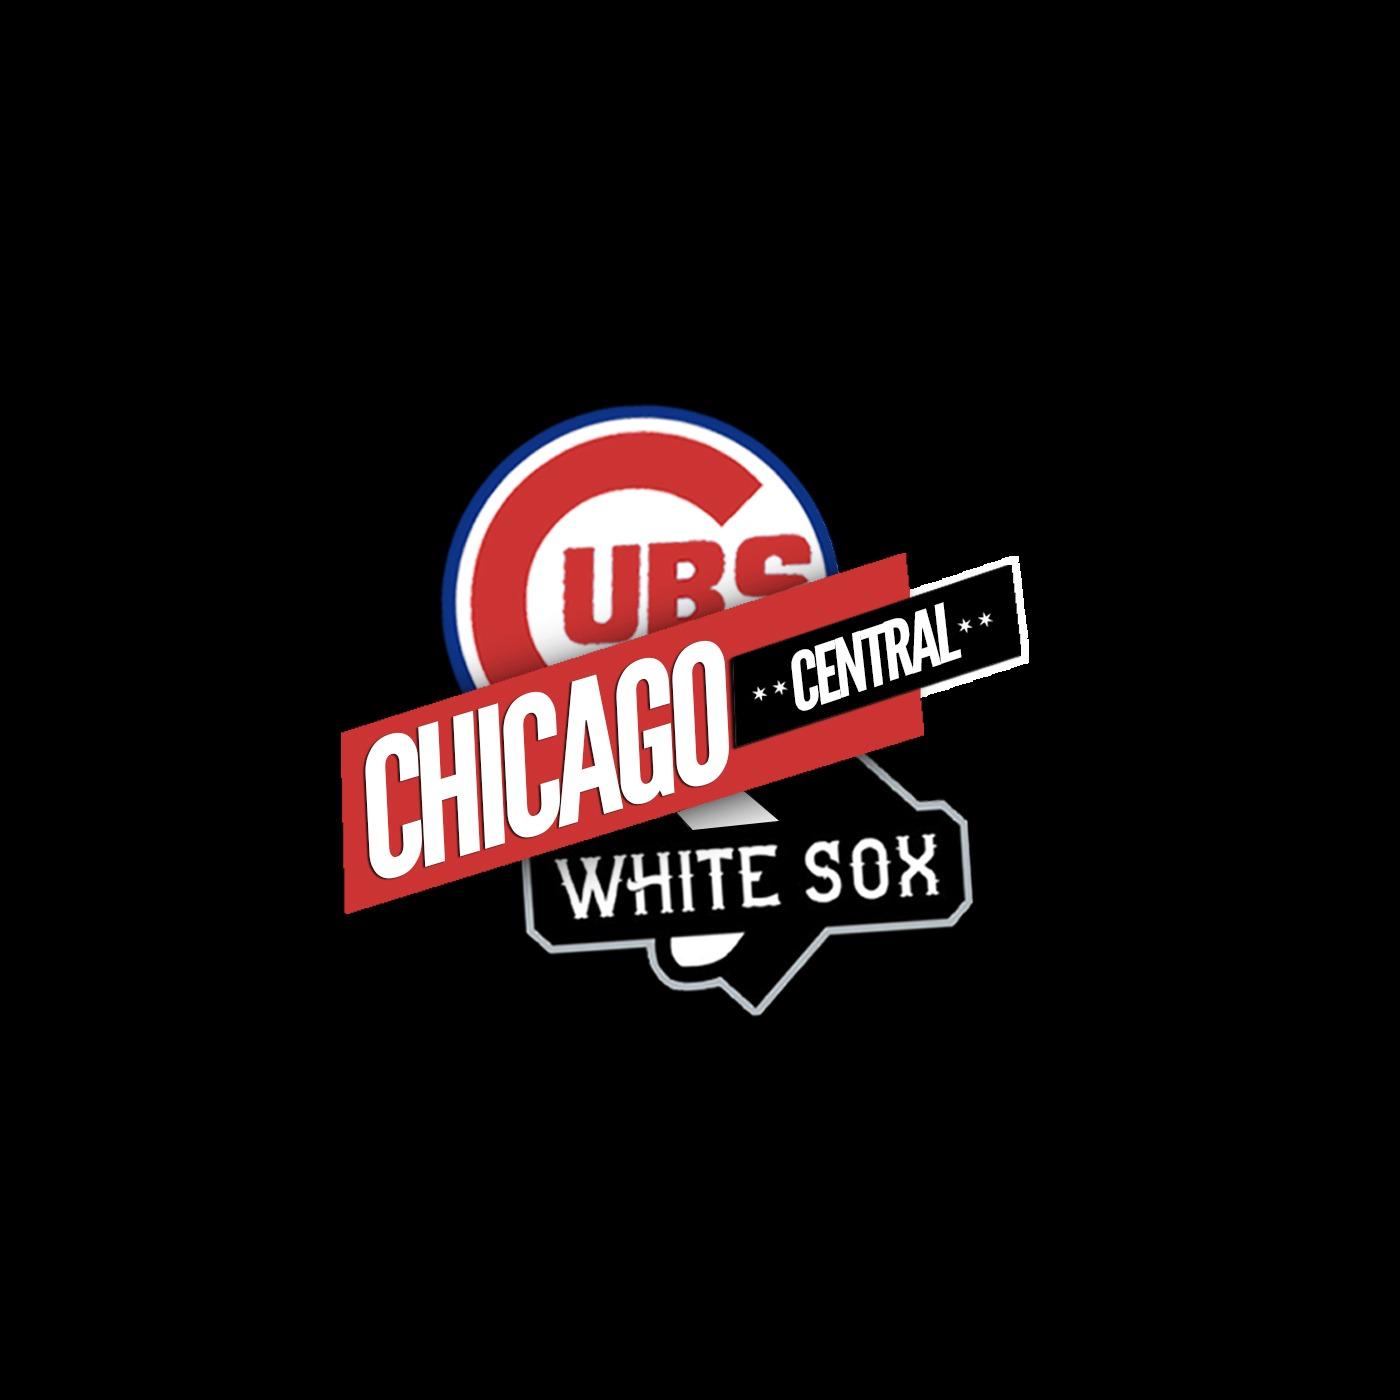 Chicago White Sox & Cubs Central